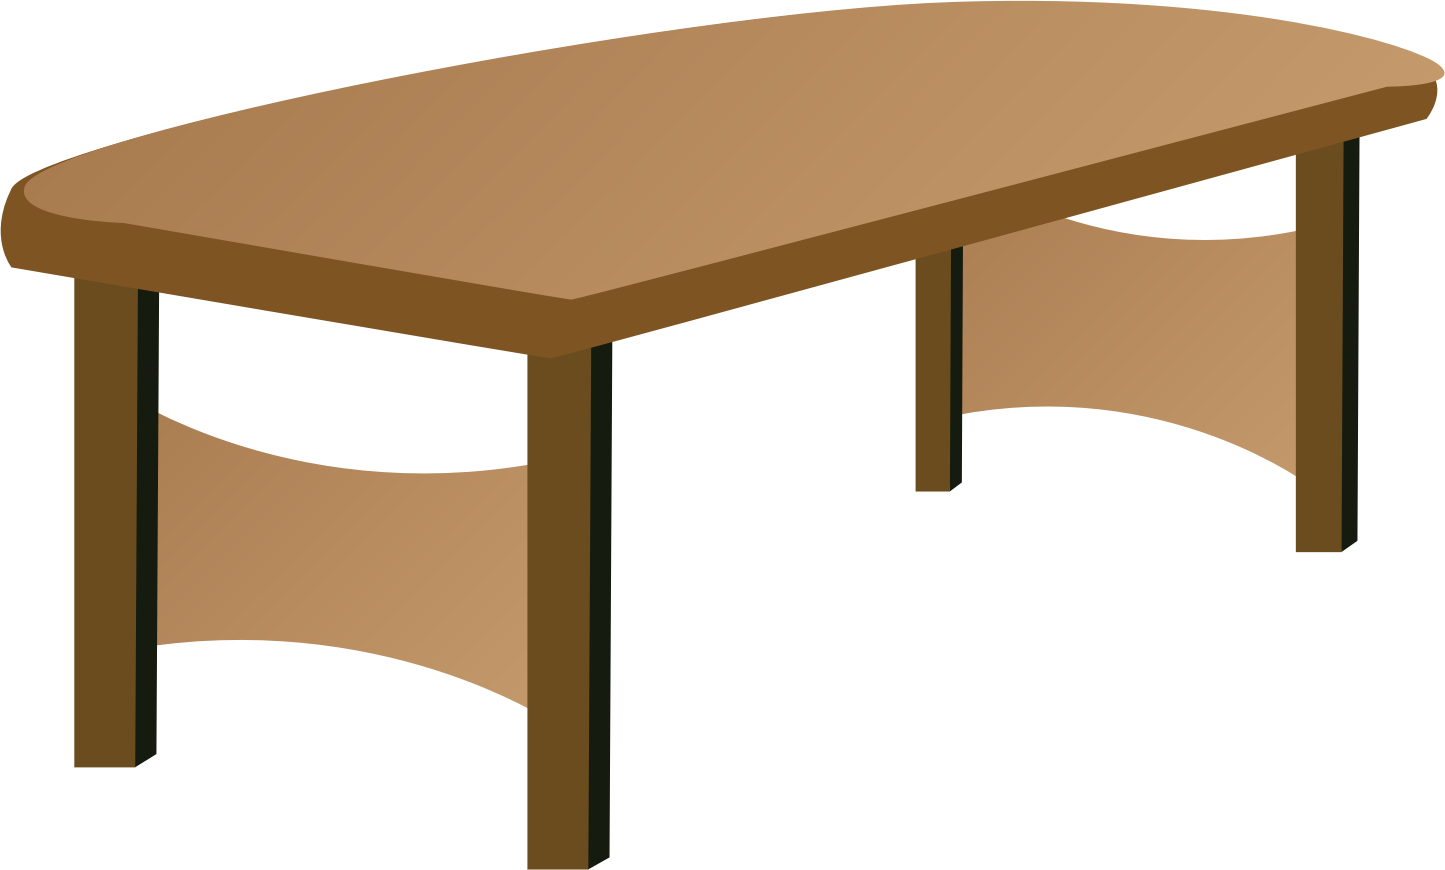 Table Nightstand Free content Clip art